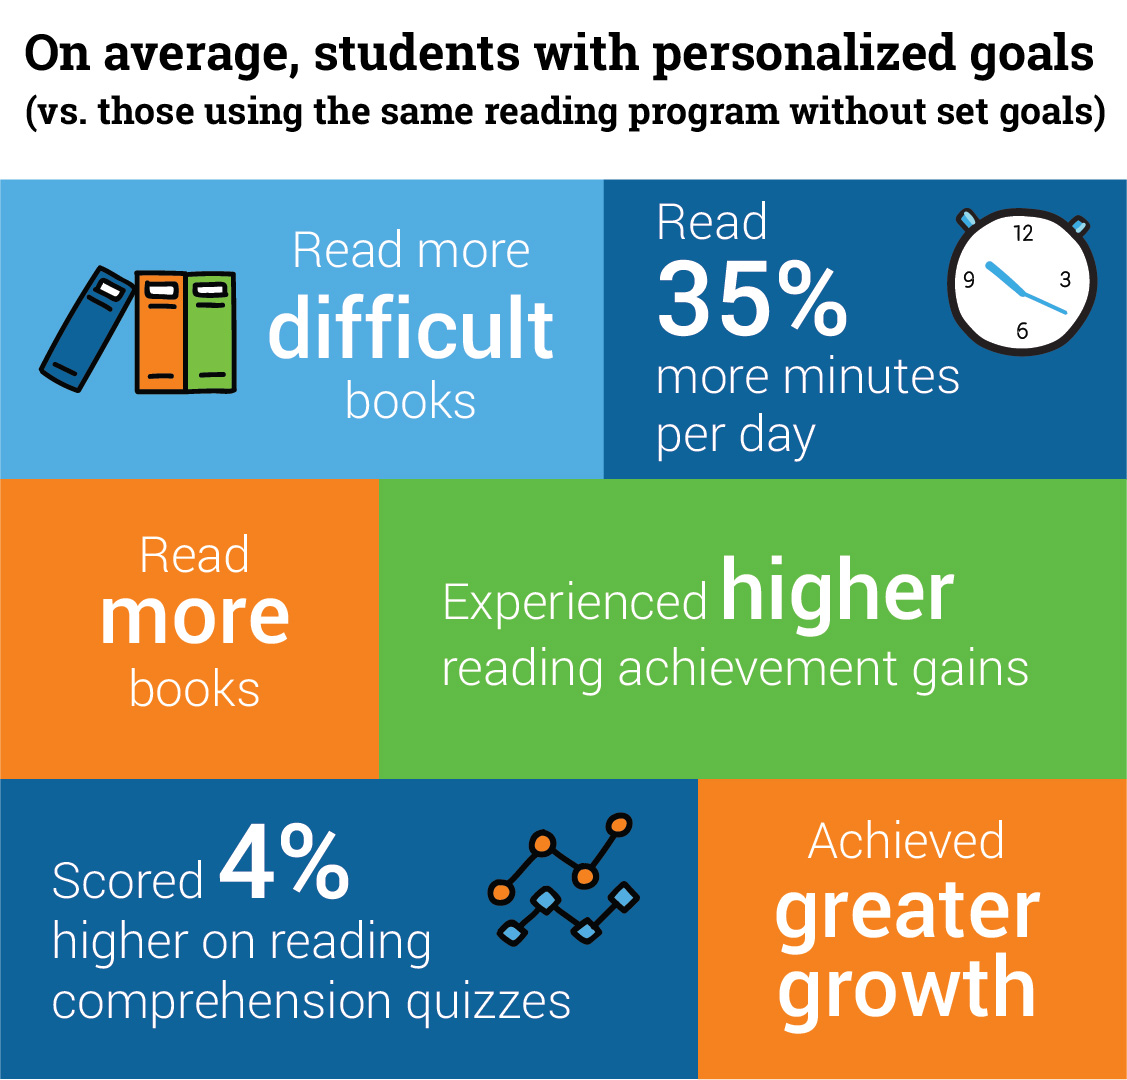 Goals and Reading Achievement